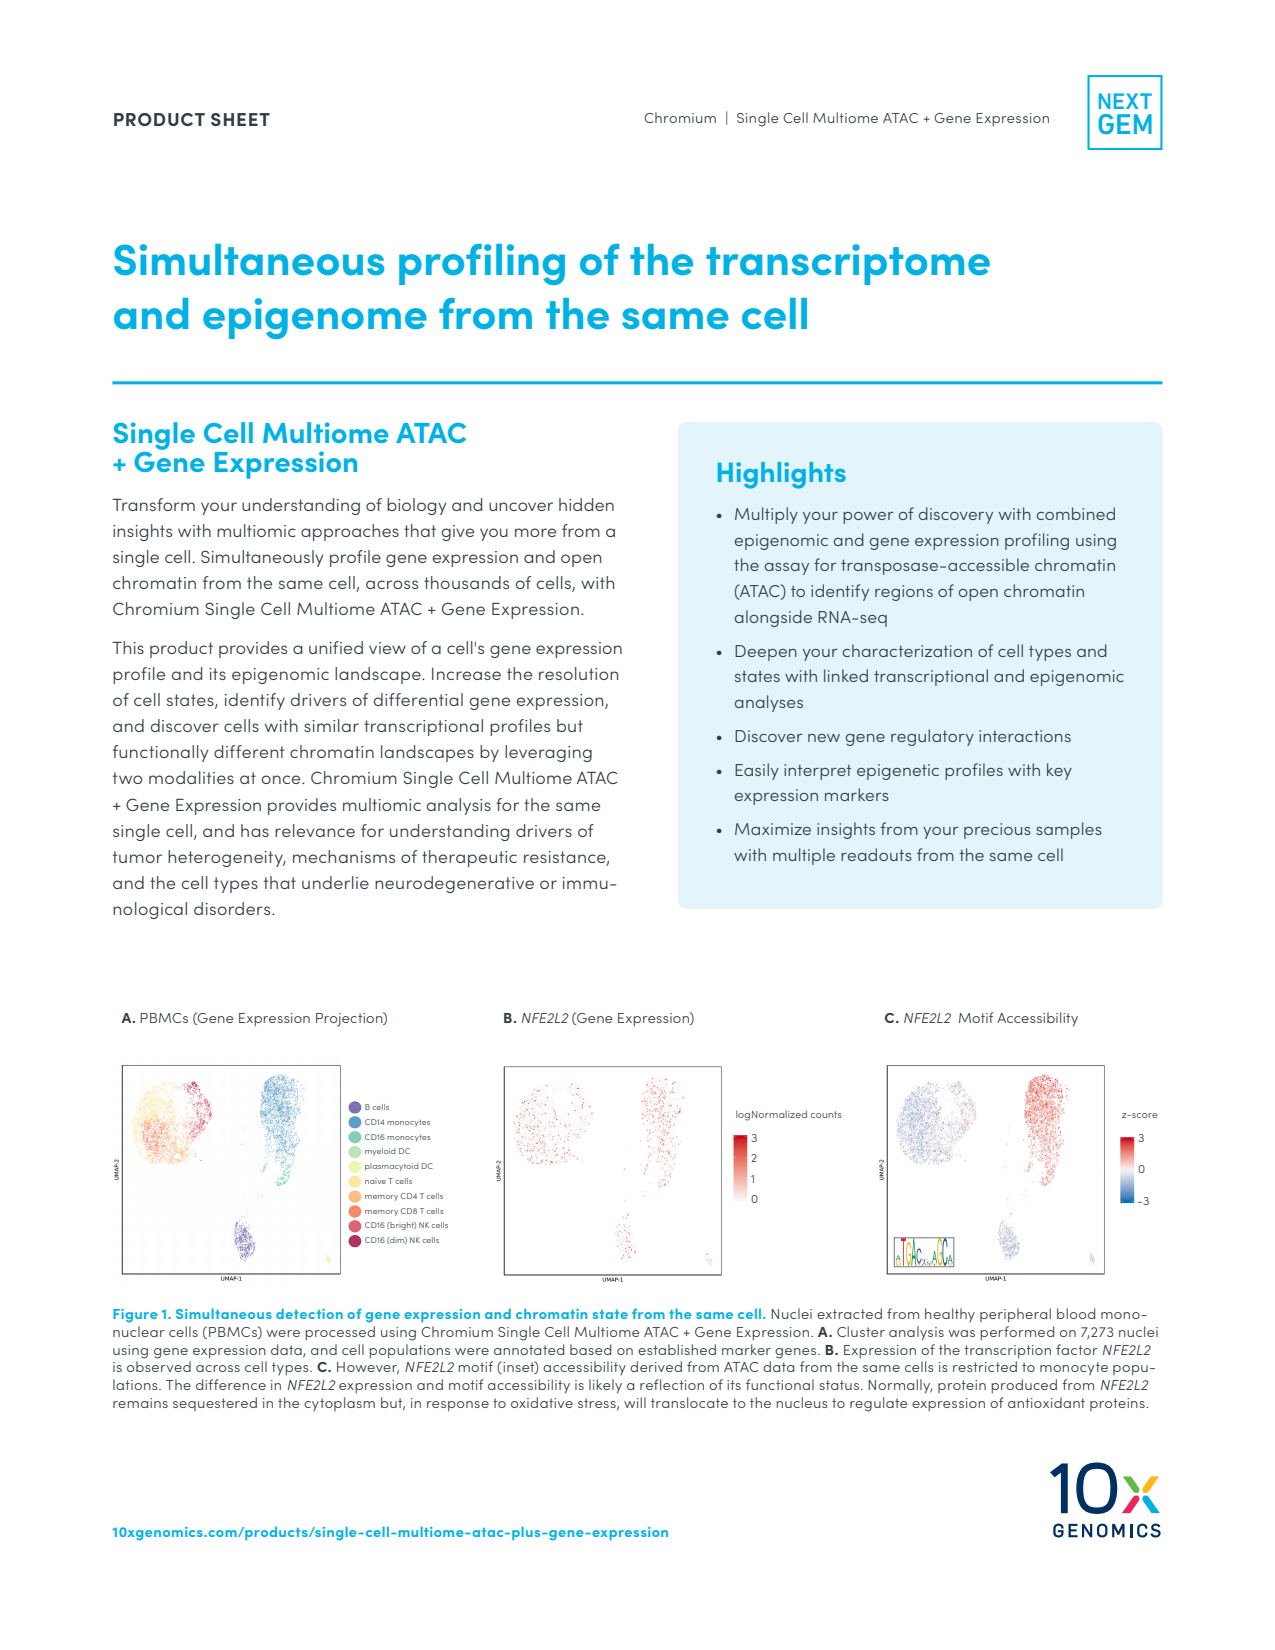 Single Cell Multiome ATAC + Gene Expression Product Sheet